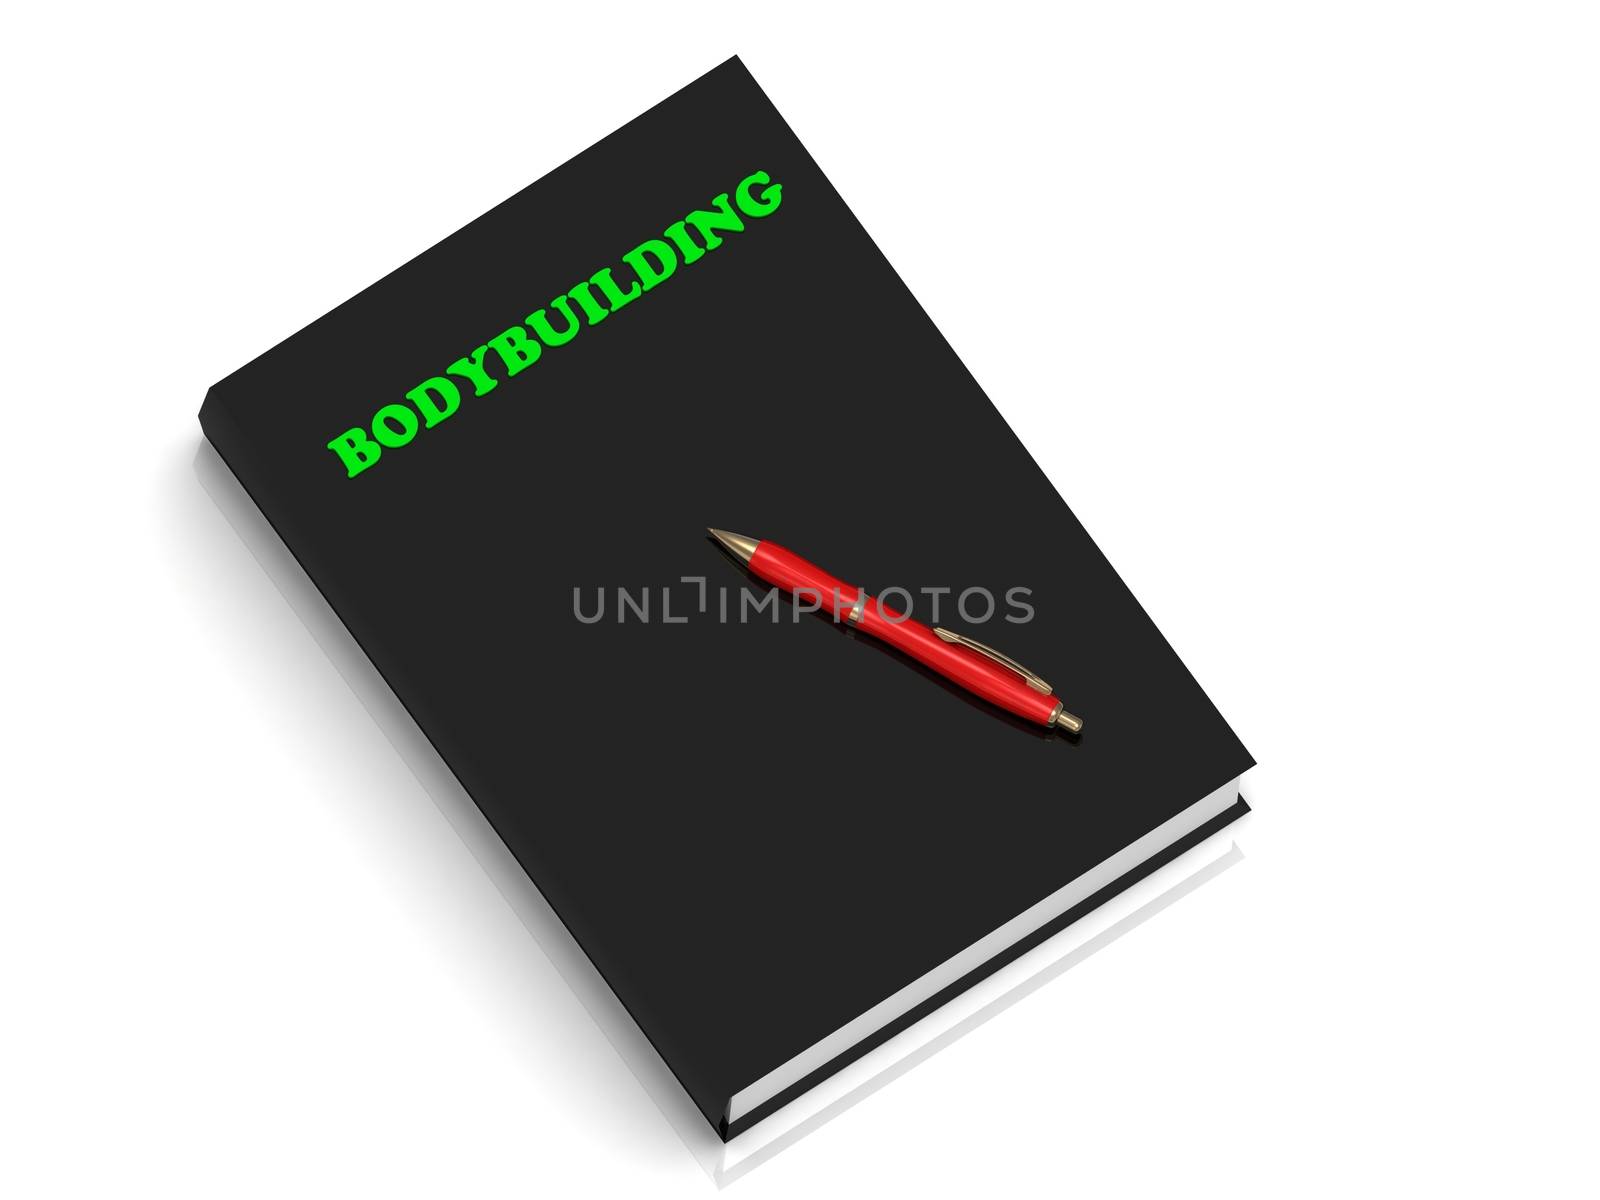 BODYBUILDING- inscription of green letters on black book on white background